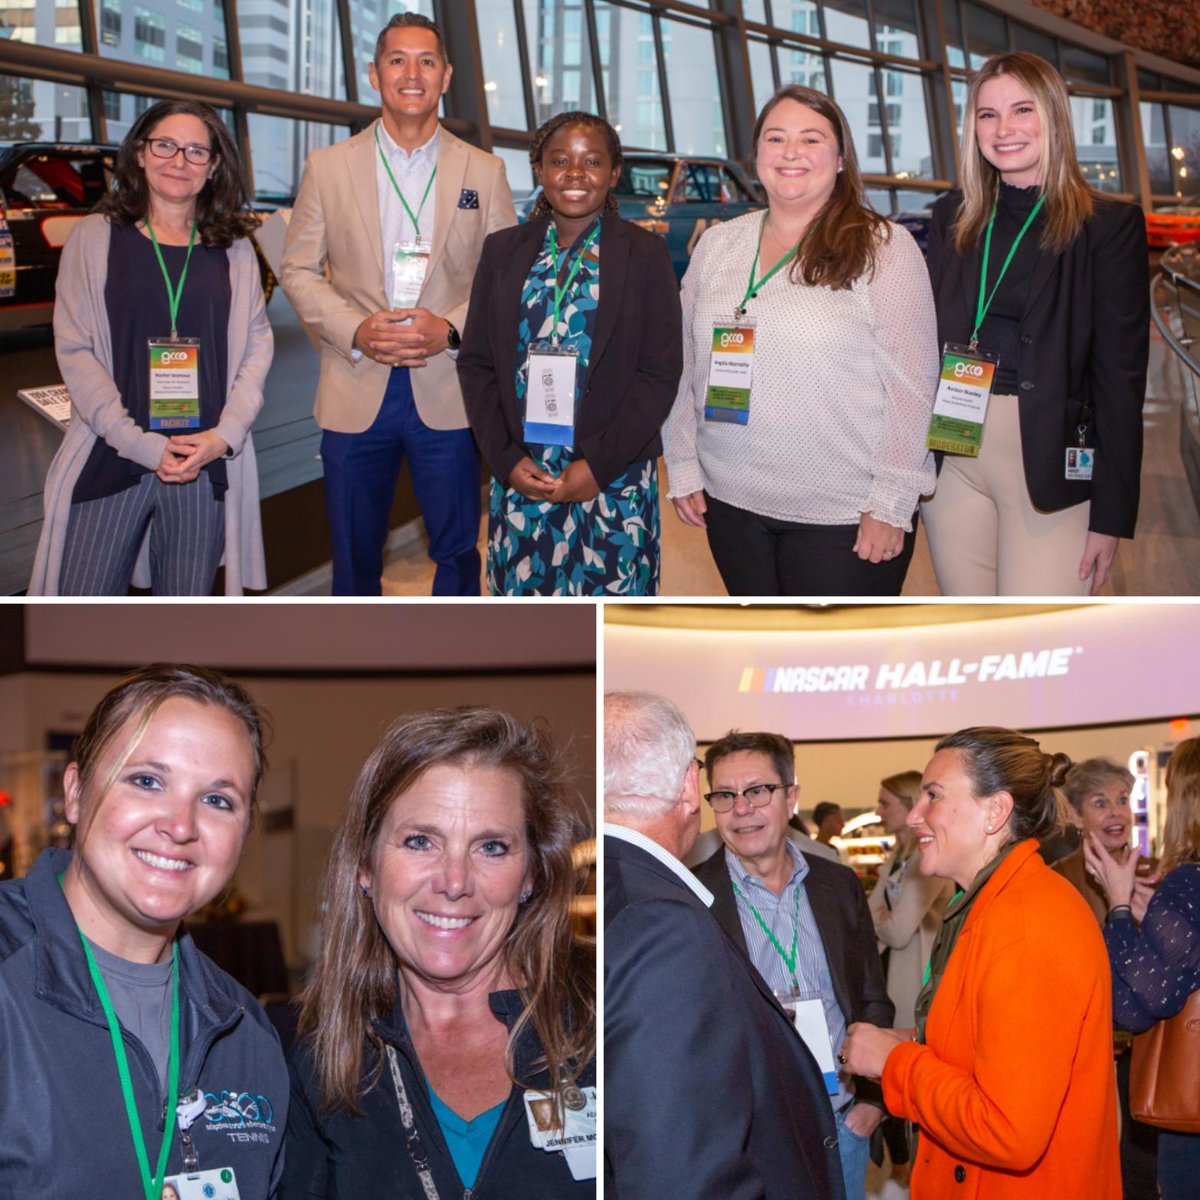 What an incredible time at #GCCO2022. A fantastic show of collaboration and excitement for the future of #osseointegration. Thank you to all who attended and don’t forget to save the date for #GCCO2023 next November in #CLT! #orthotwitter #MedTwitter #OI